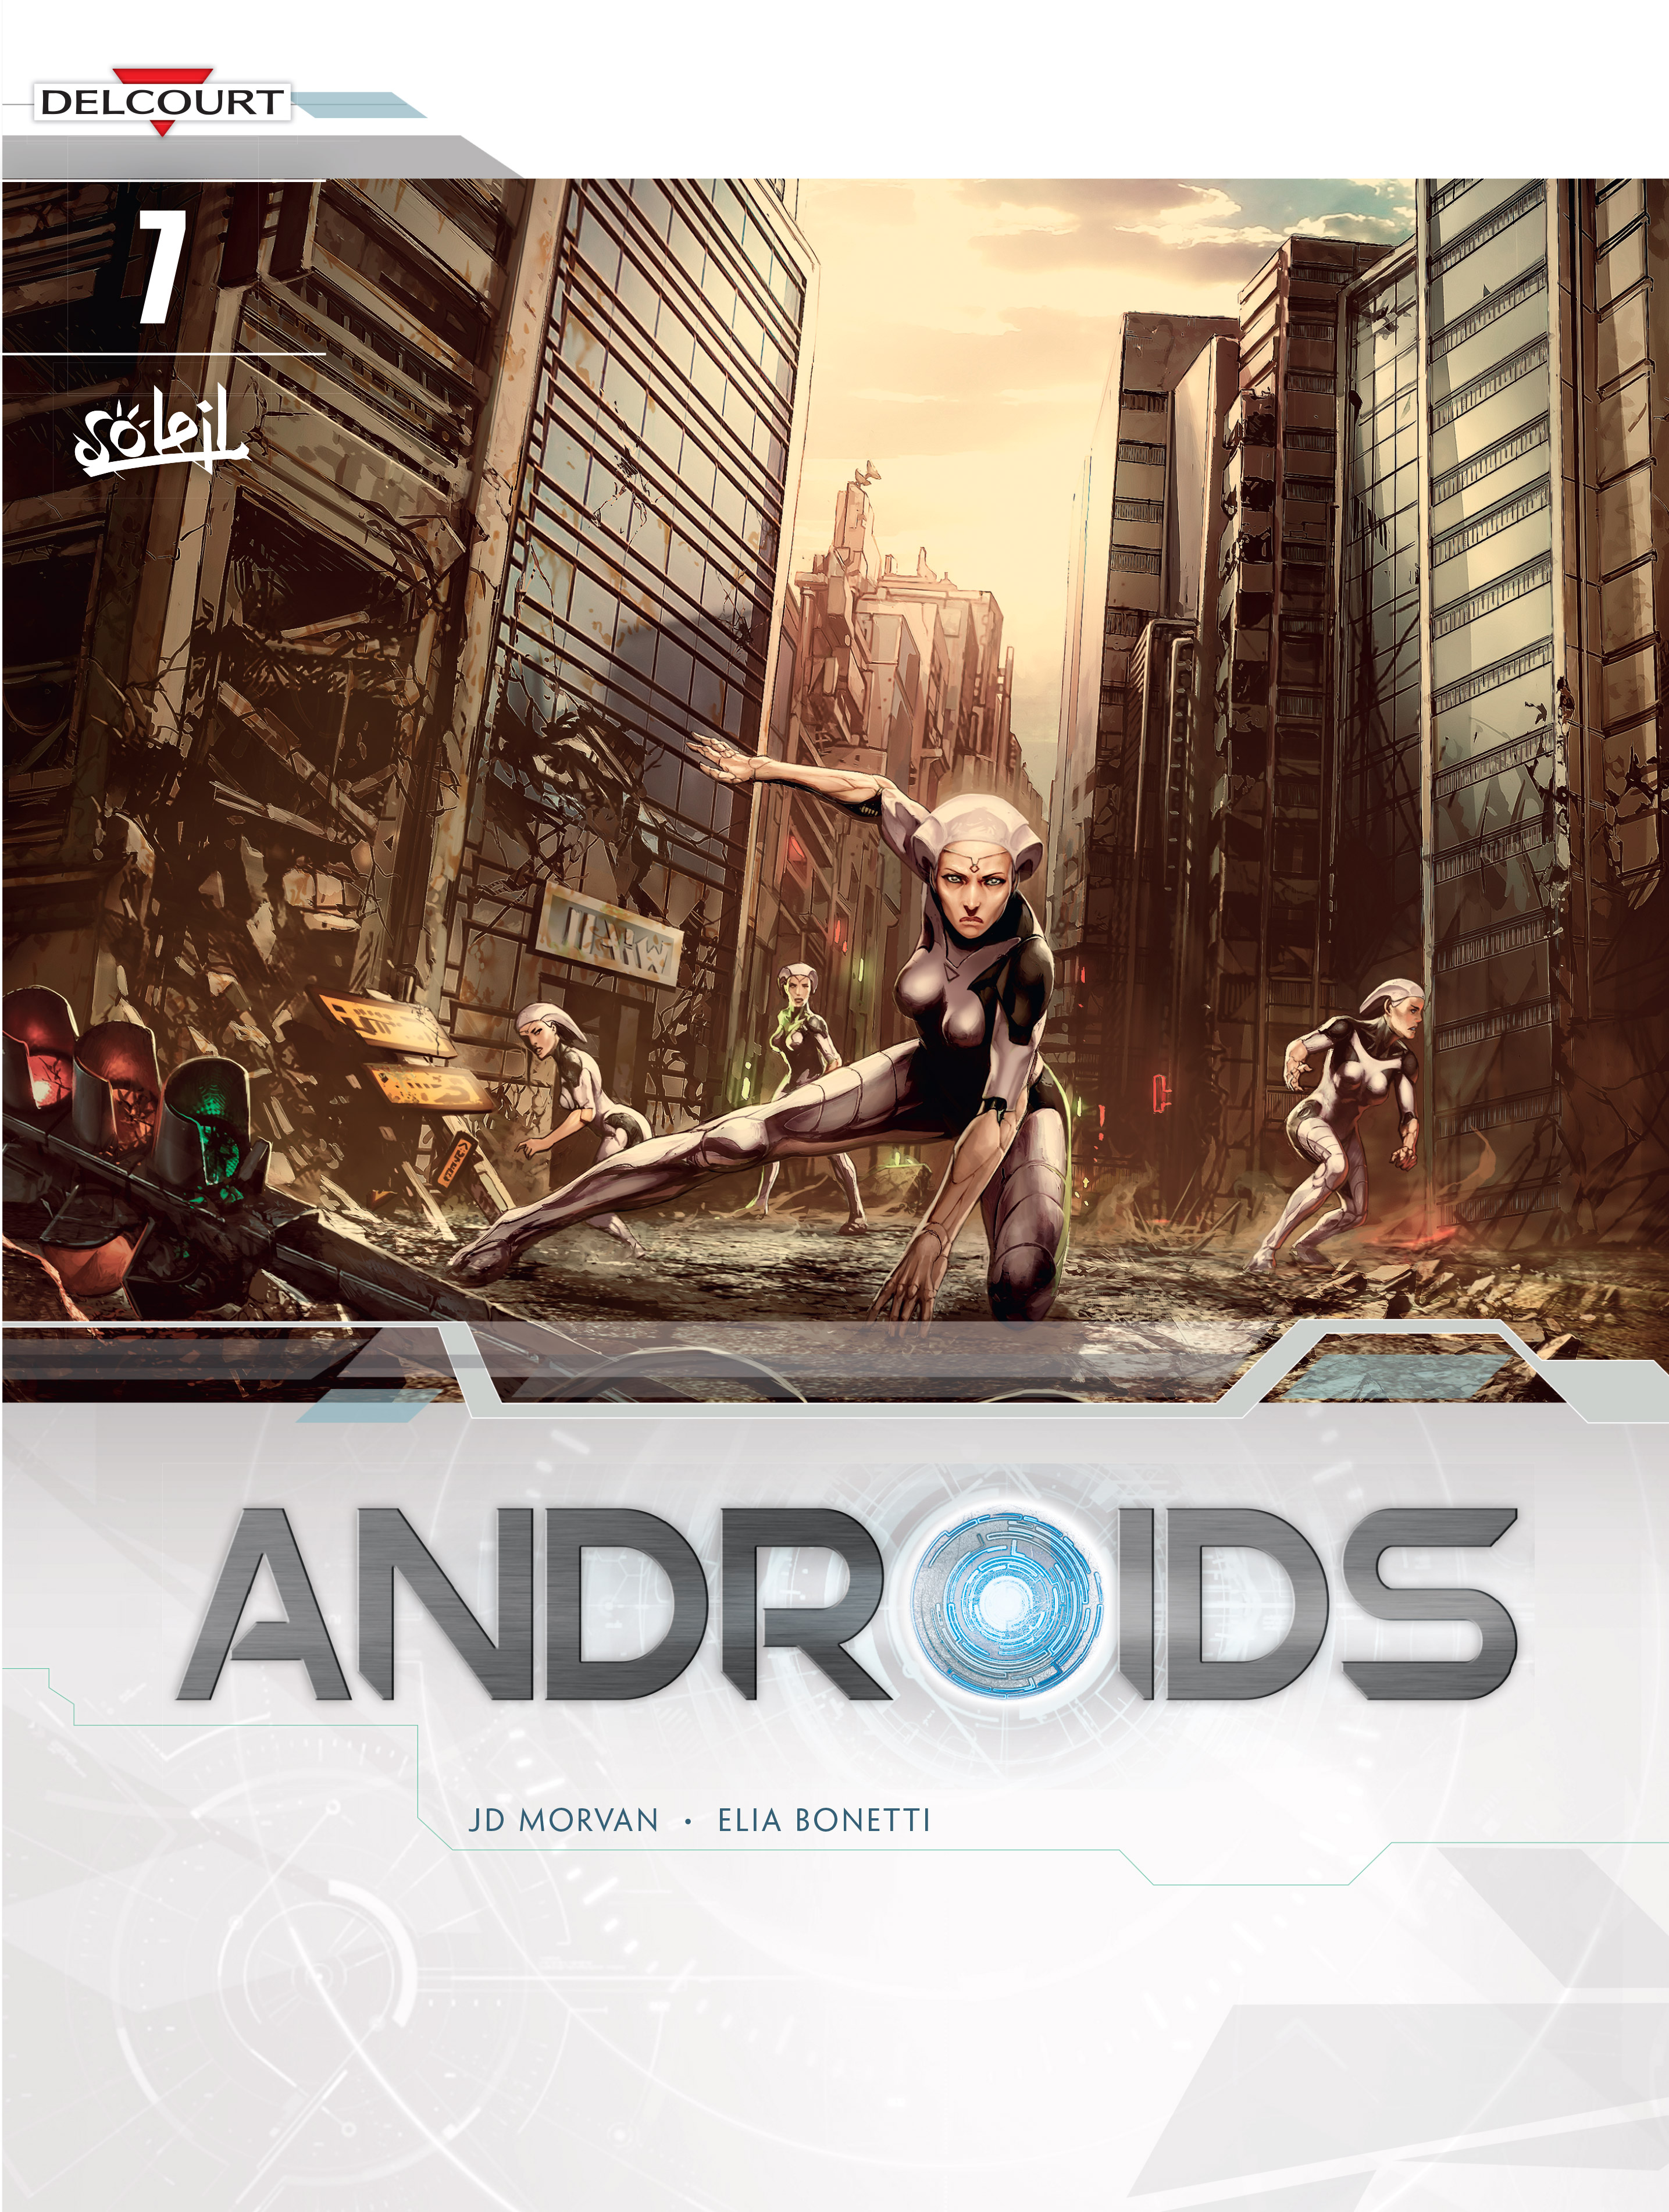 Read online Androïds comic -  Issue #7 - 1